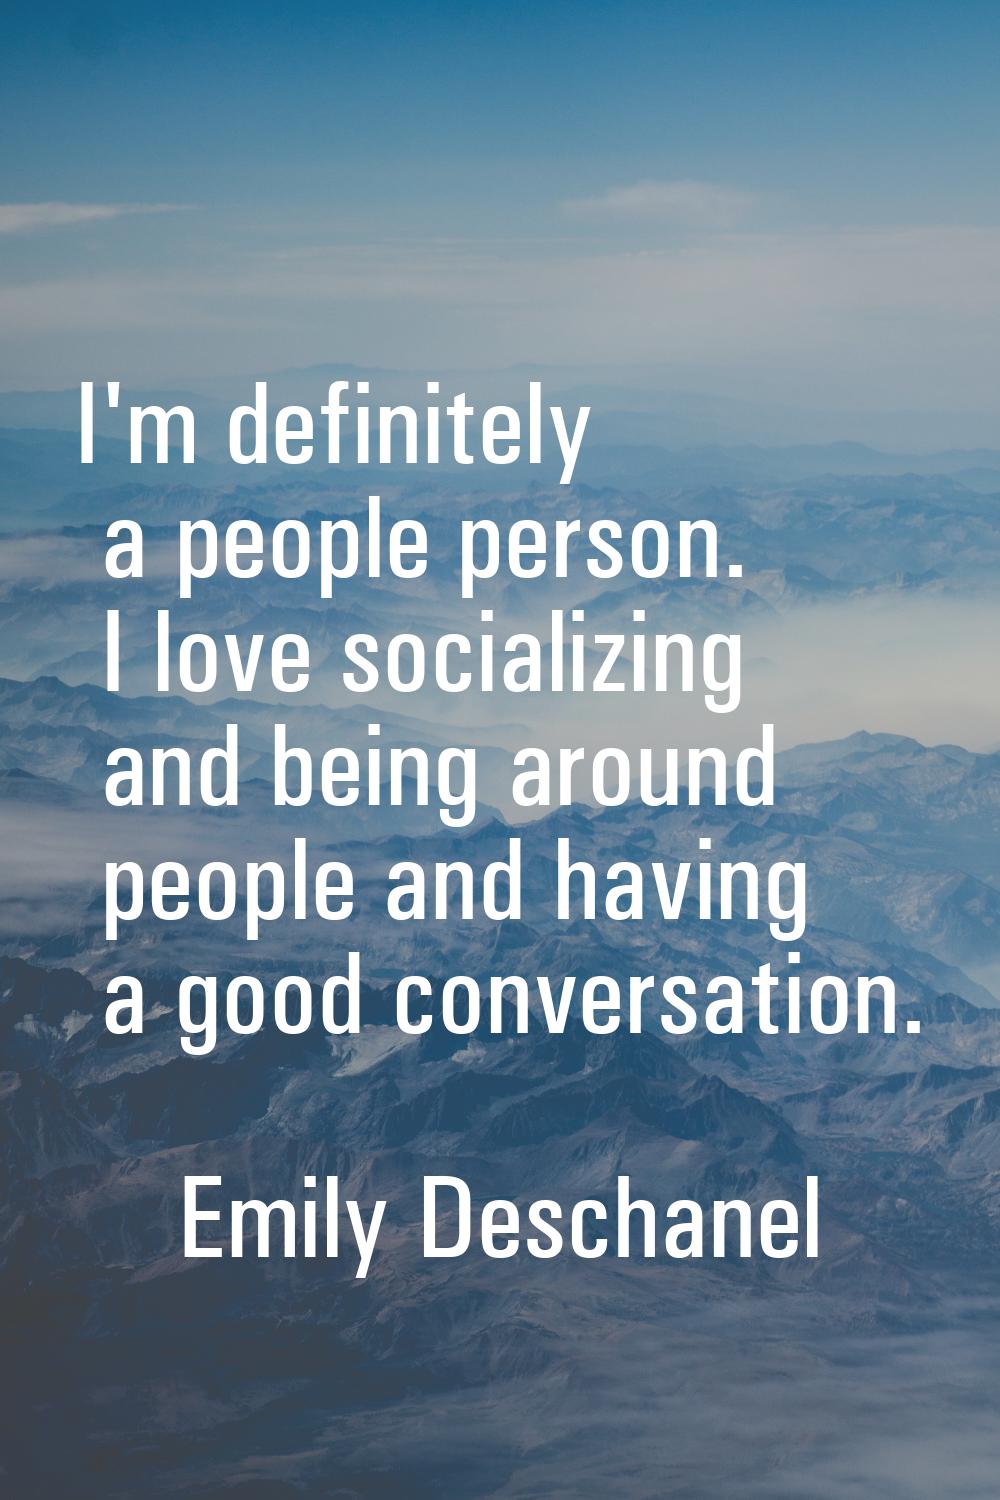 I'm definitely a people person. I love socializing and being around people and having a good conver